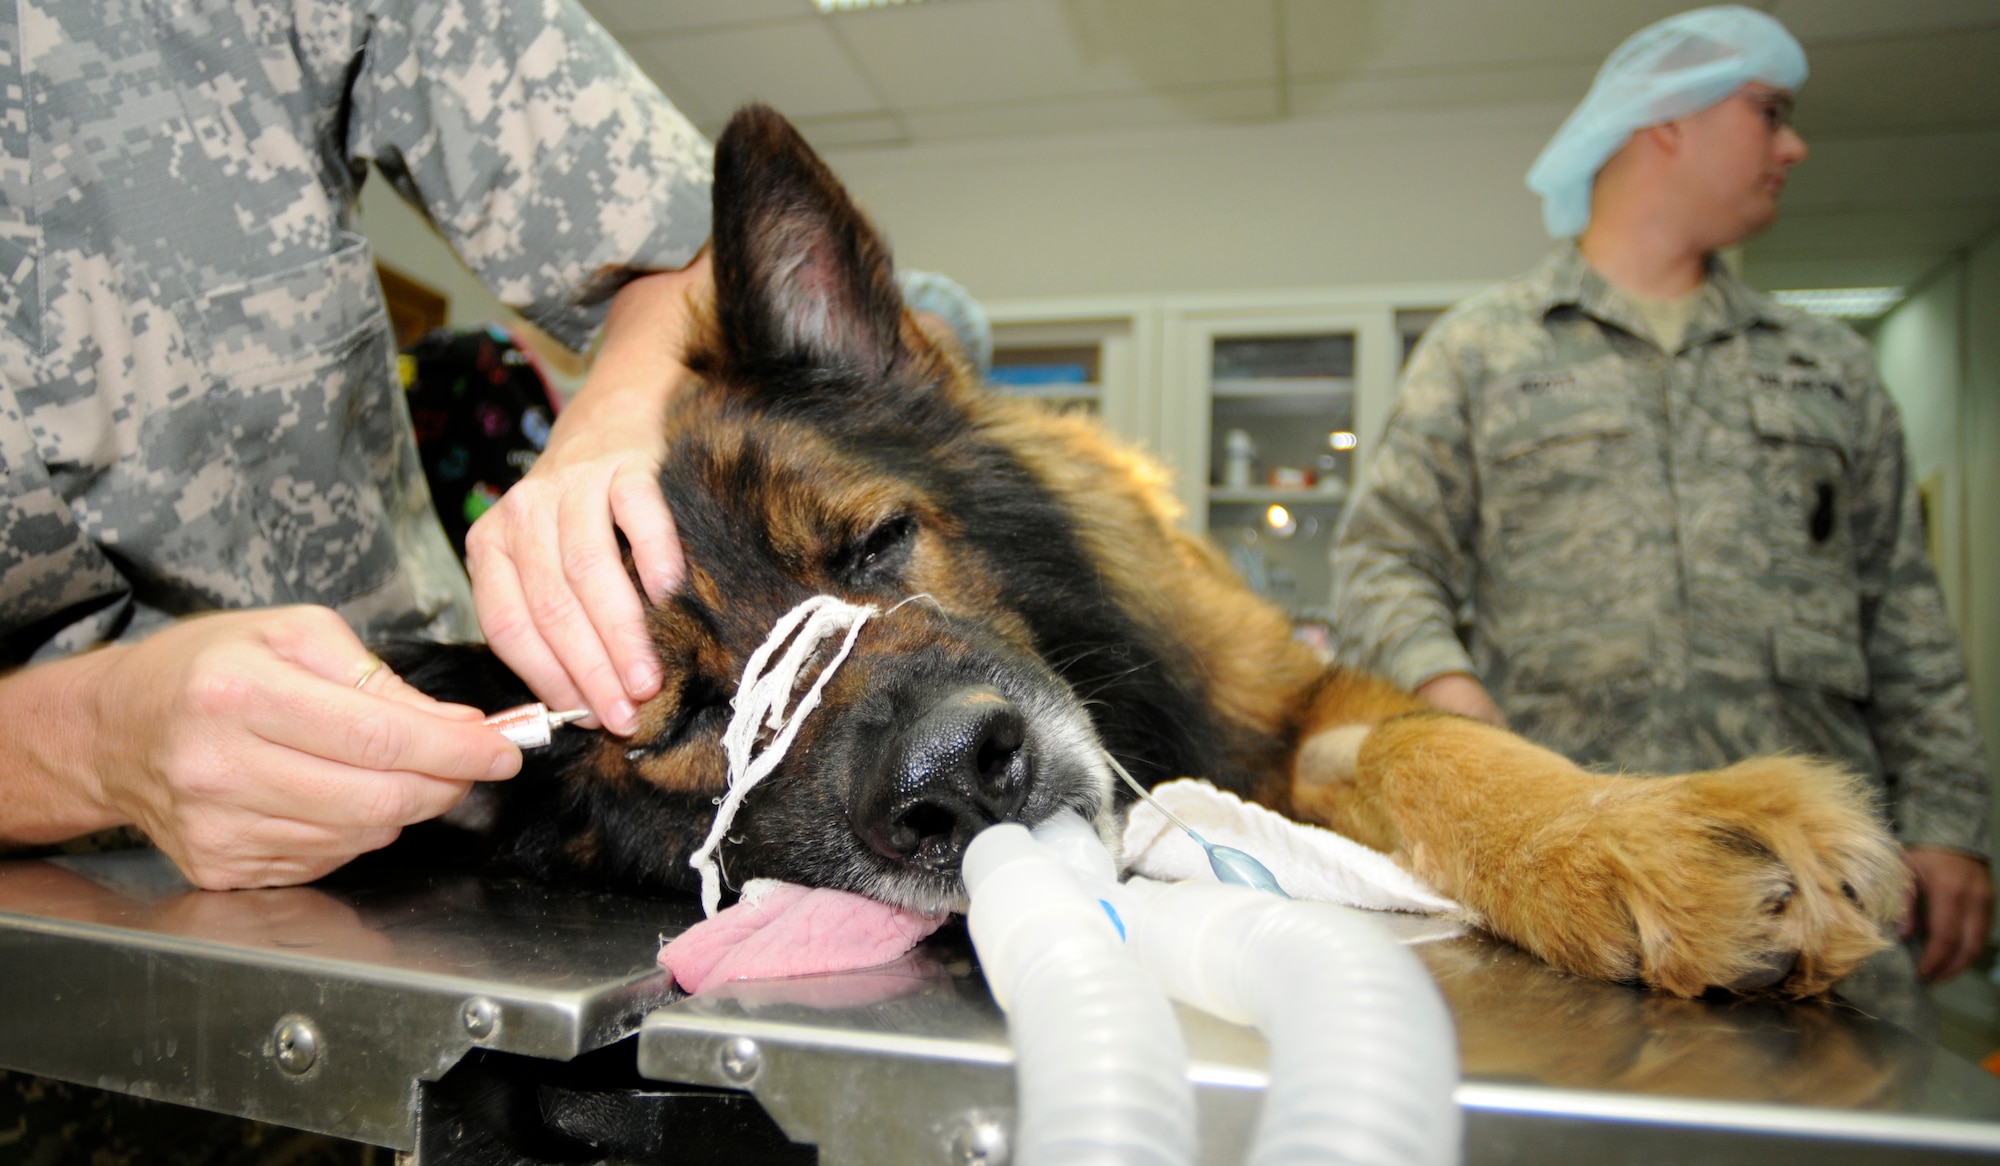 Suli, a 39th Security Forces Squadron military working dog, receives a treatment to prevent the drying of his eyes prior to his prophylactic gastropexy, also referred to as stomach tacking, to prevent gastric torsion, or twisting of the stomach Thursday, Aug. 27, 2009 at the Veterinary Clinic, Incirlik Air Base, Turkey.   The surgery was completed after a recommendation by the Army, the service in charge of medical care for the military working dog program, for all dogs in the program to receive the surgery.  Stomach twisting is caused by gastric dilatation and volvulus, commonly known as bloat, the second leading killer of dogs after cancer.  (U.S. Air Force photo/Staff Sgt. Raymond Hoy)